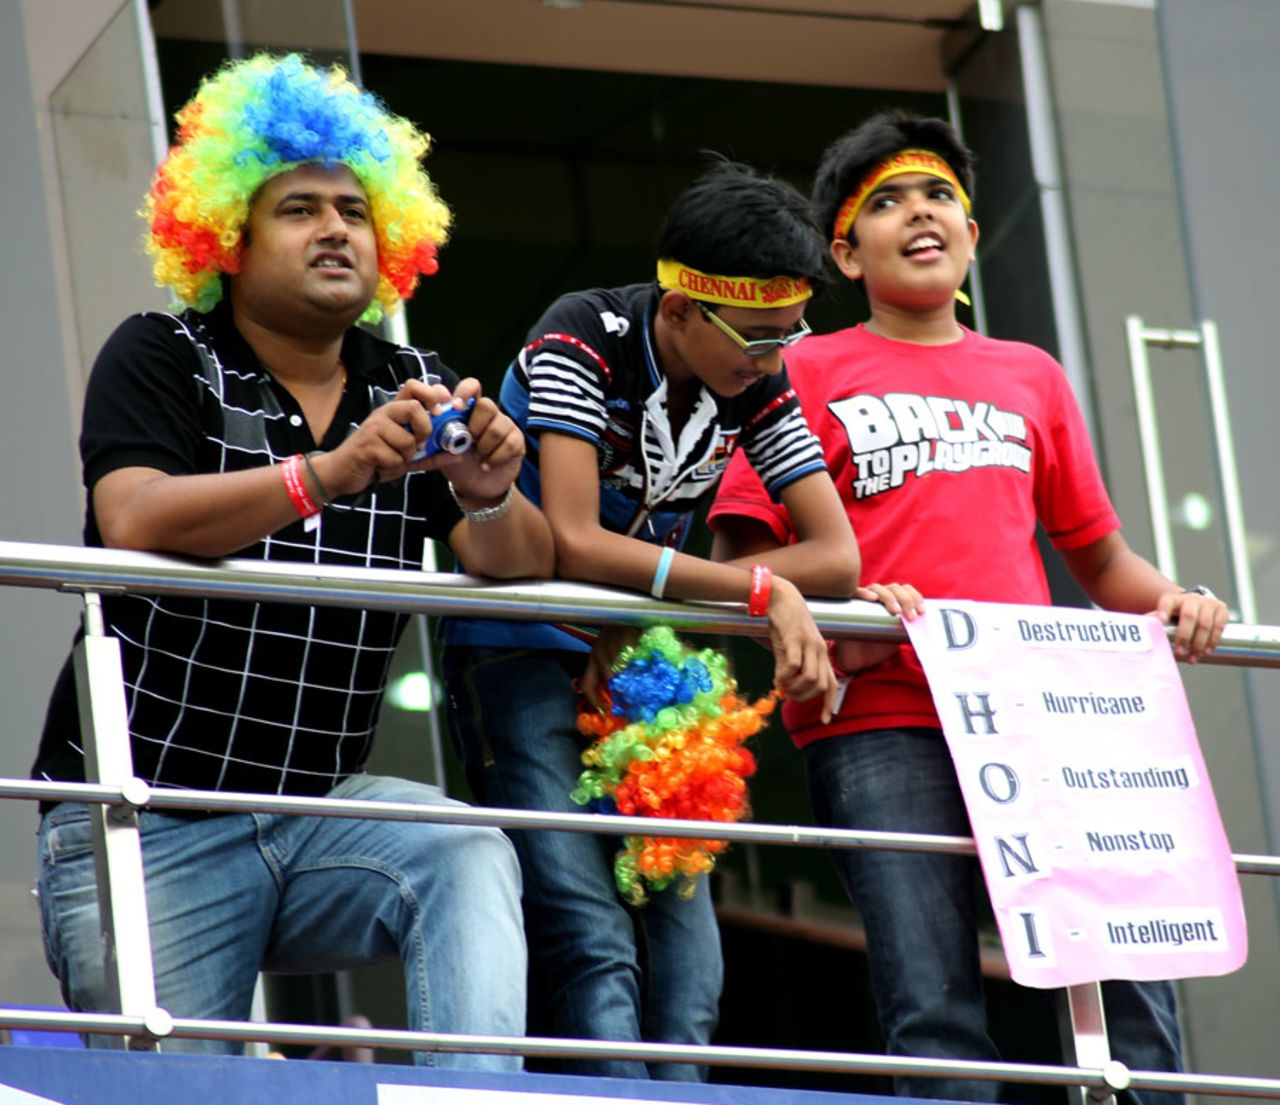 Dhoni's 19-ball 63 in Ranchi was still fresh in the fans' minds, Titans v Sunrisers Hyderabad, Champions League 2013, Group B, Ranchi, September 28, 2013